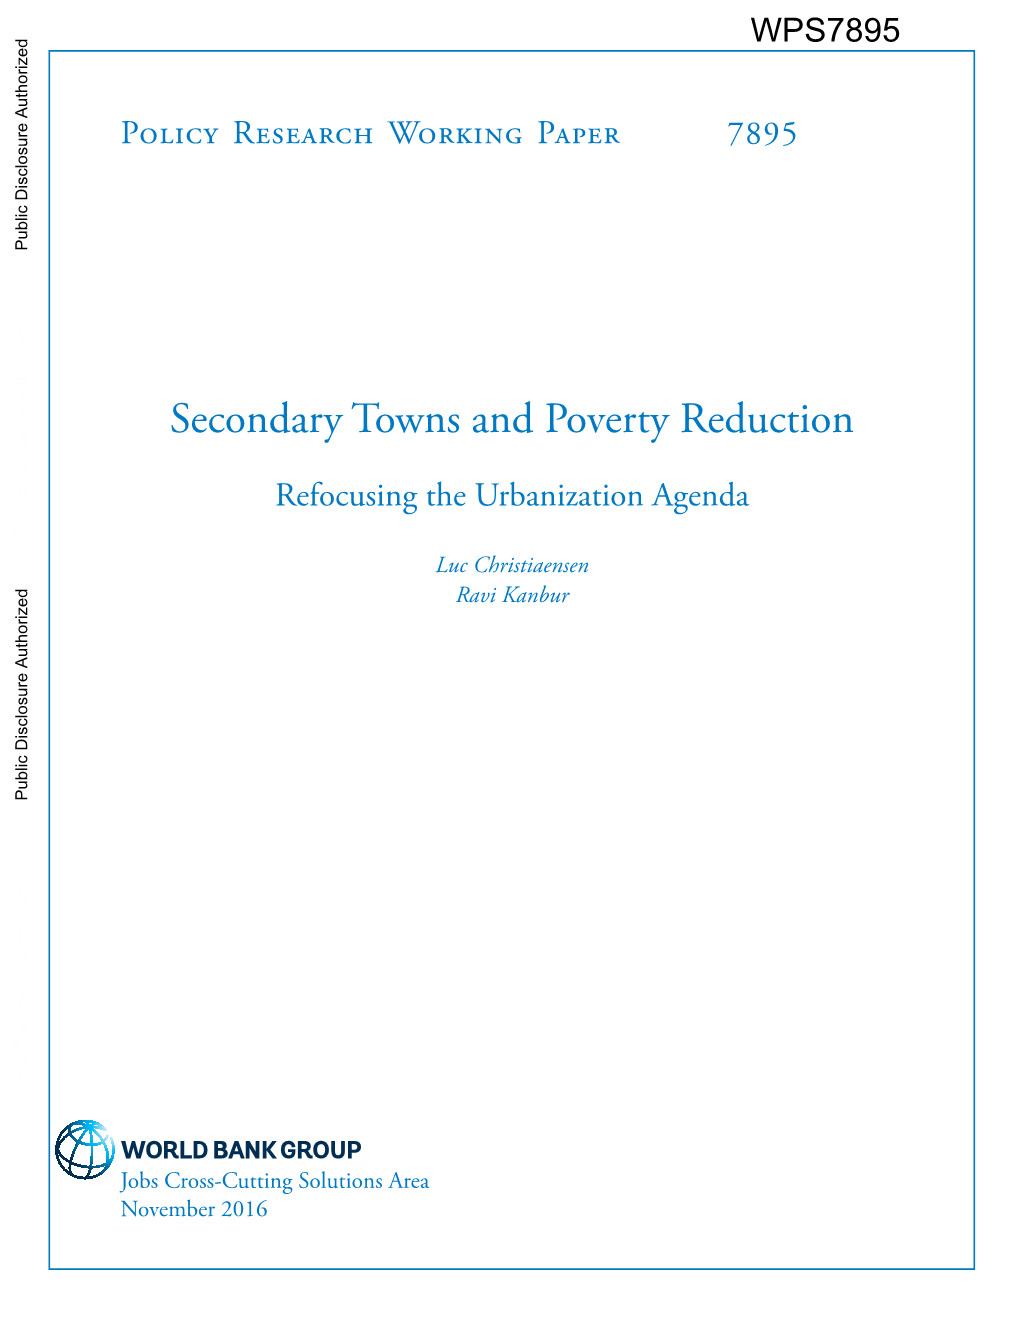 Secondary Towns and Poverty Reduction Refocusing The